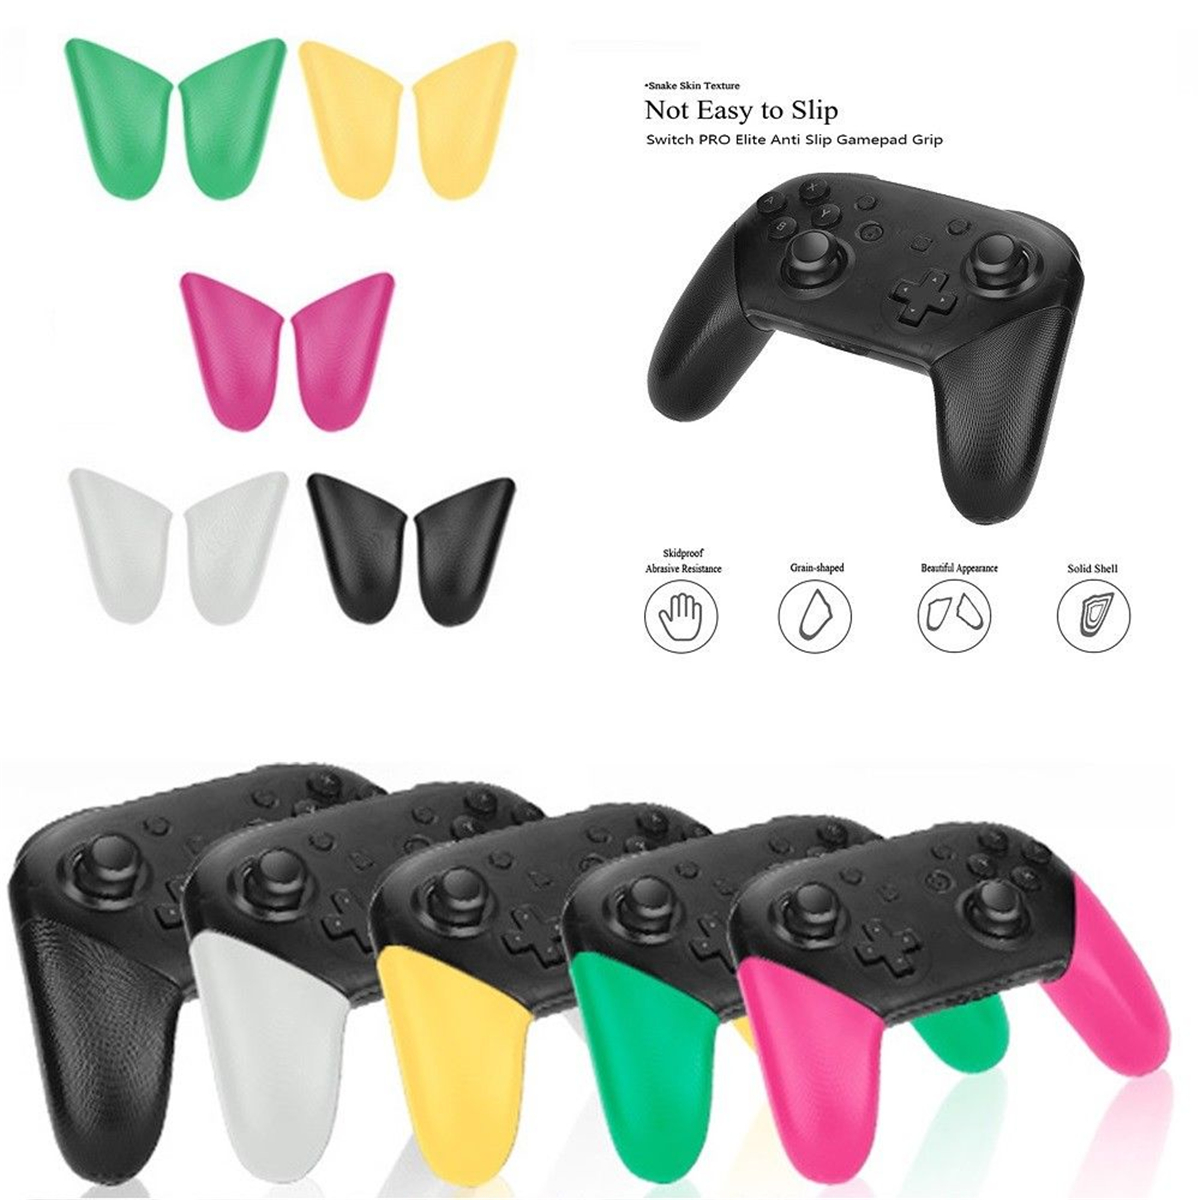 Replacement Grip Handle Protection Solid Shell Skidproof Holder For Nintendo Switch Pro Gamepad Controller 11